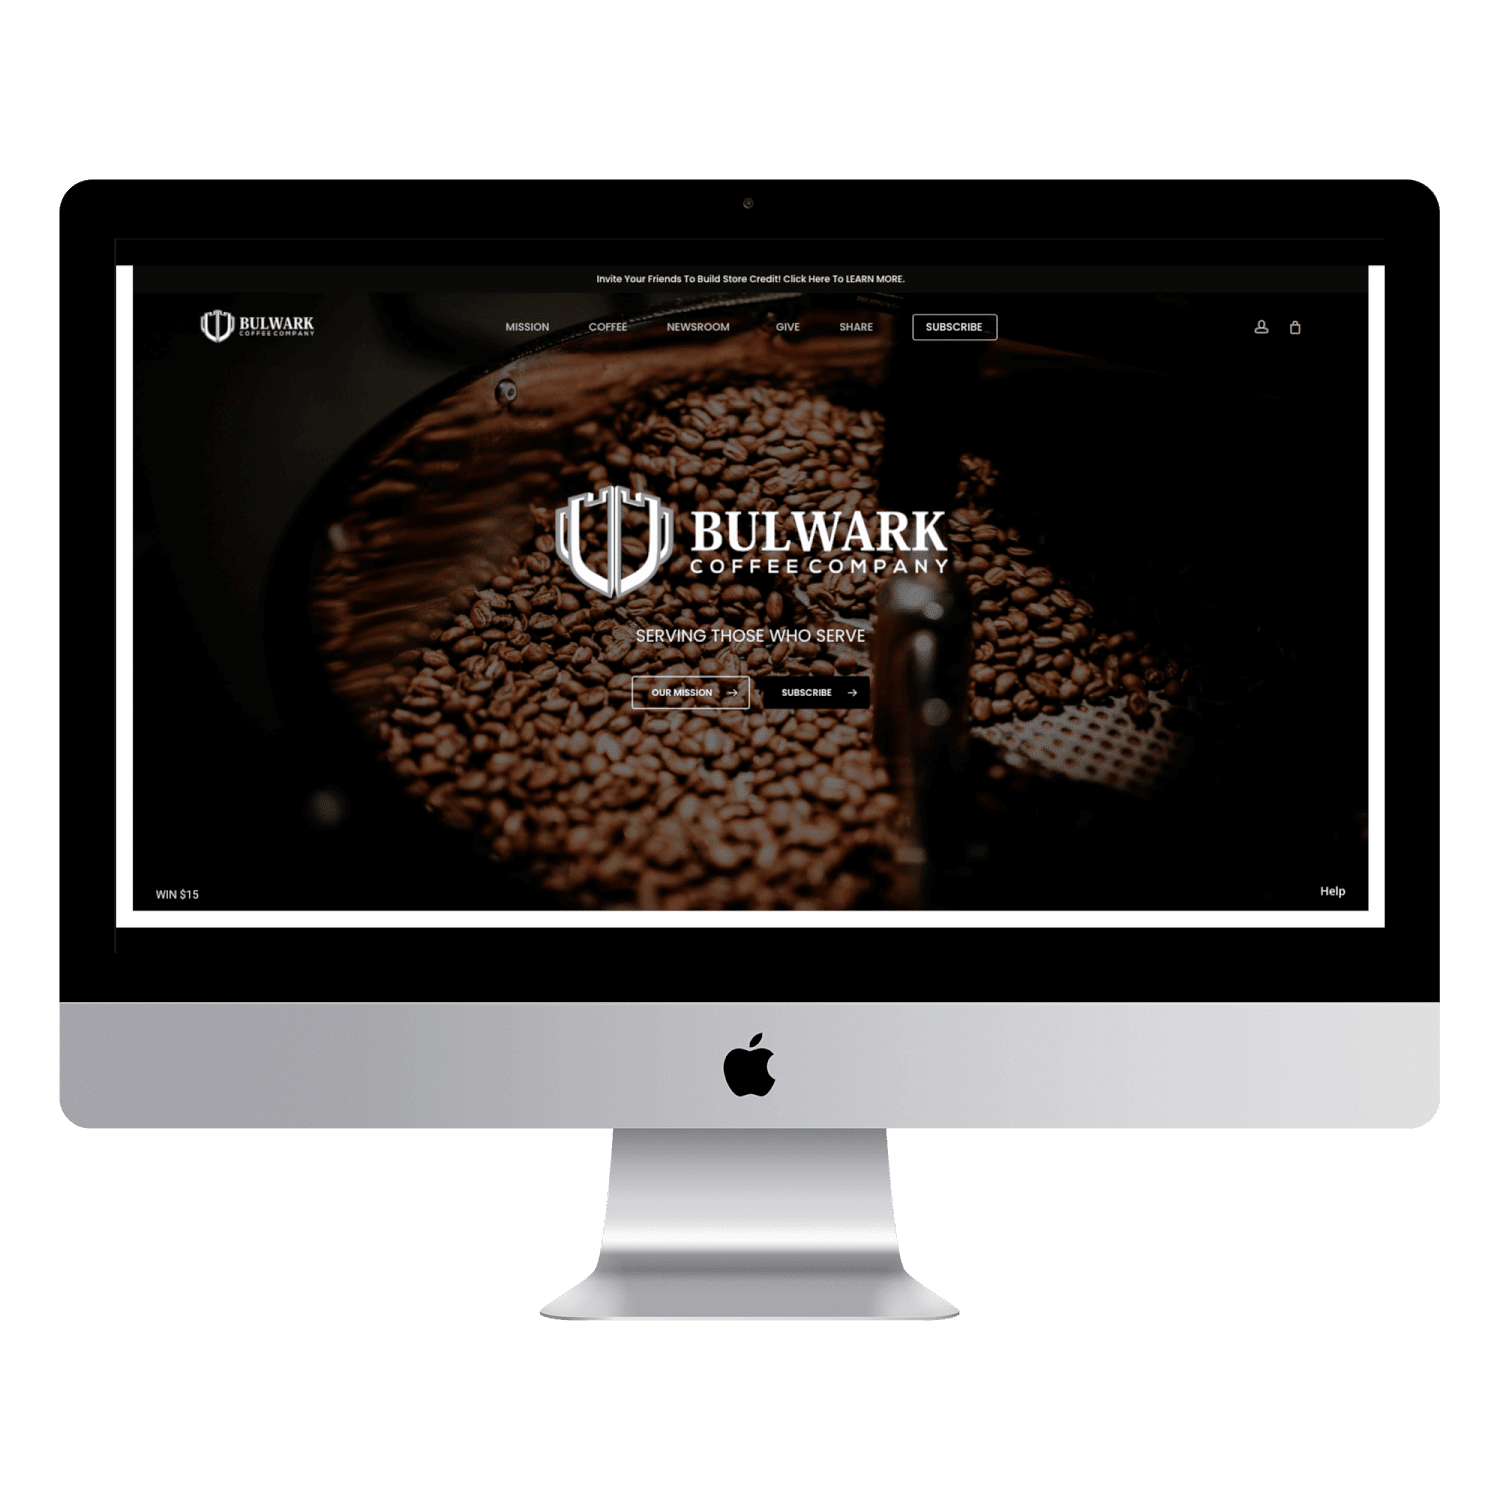 Bulwark front page mockup - website building and brand business development